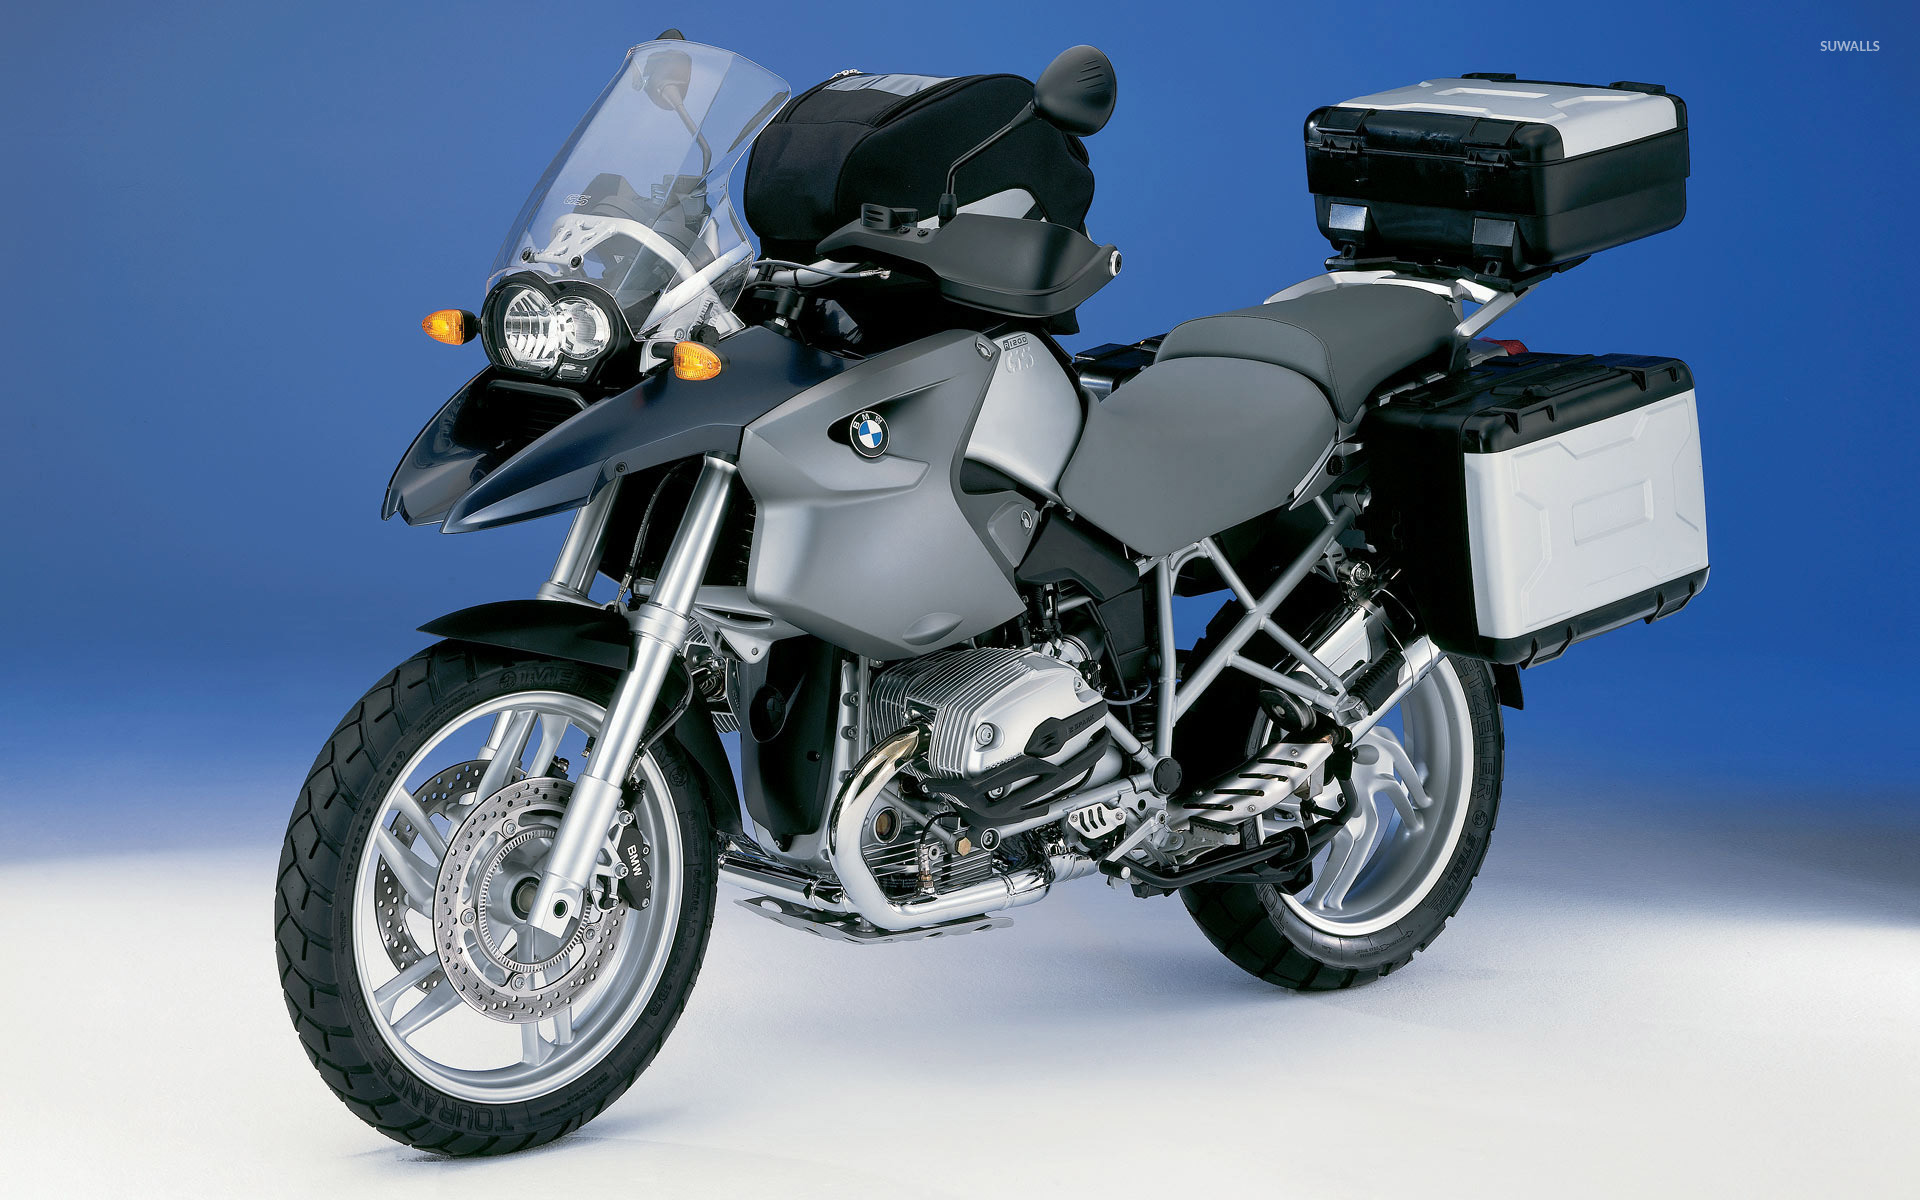 BMW R1200GS [9] wallpaper - Motorcycle wallpapers - #35373